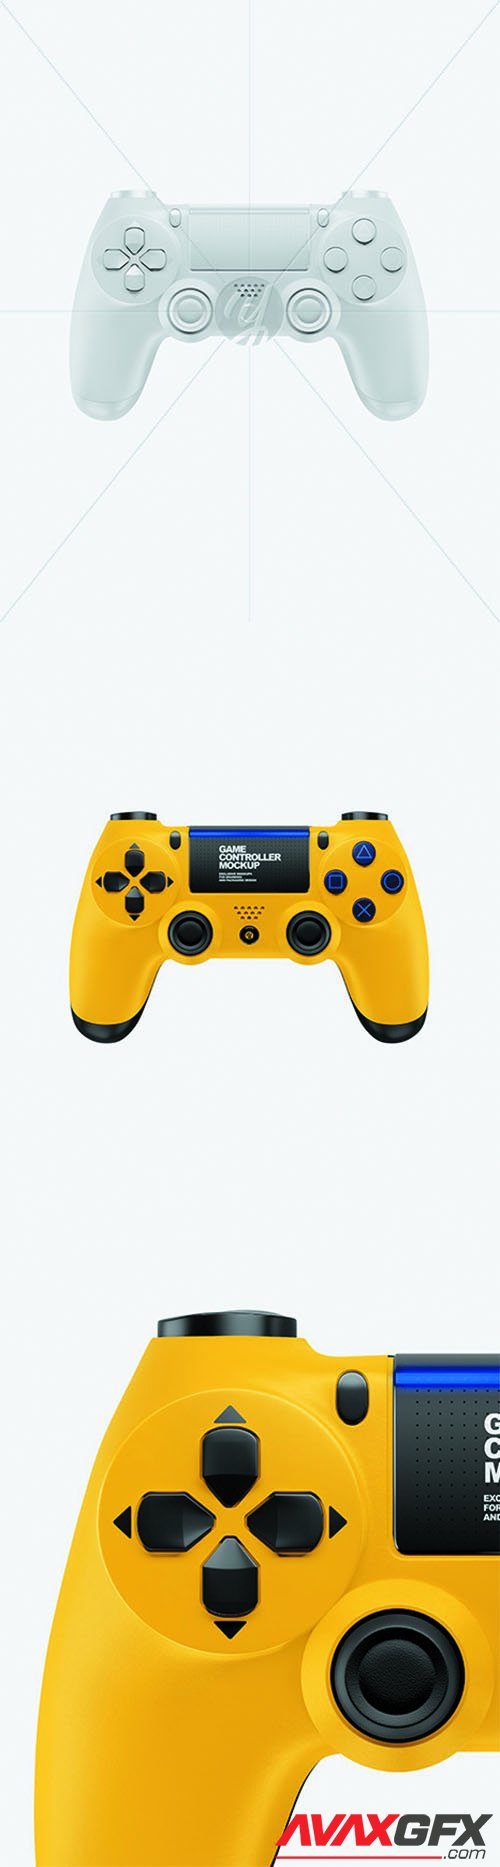 Game Controller Mockup - Front View 62859